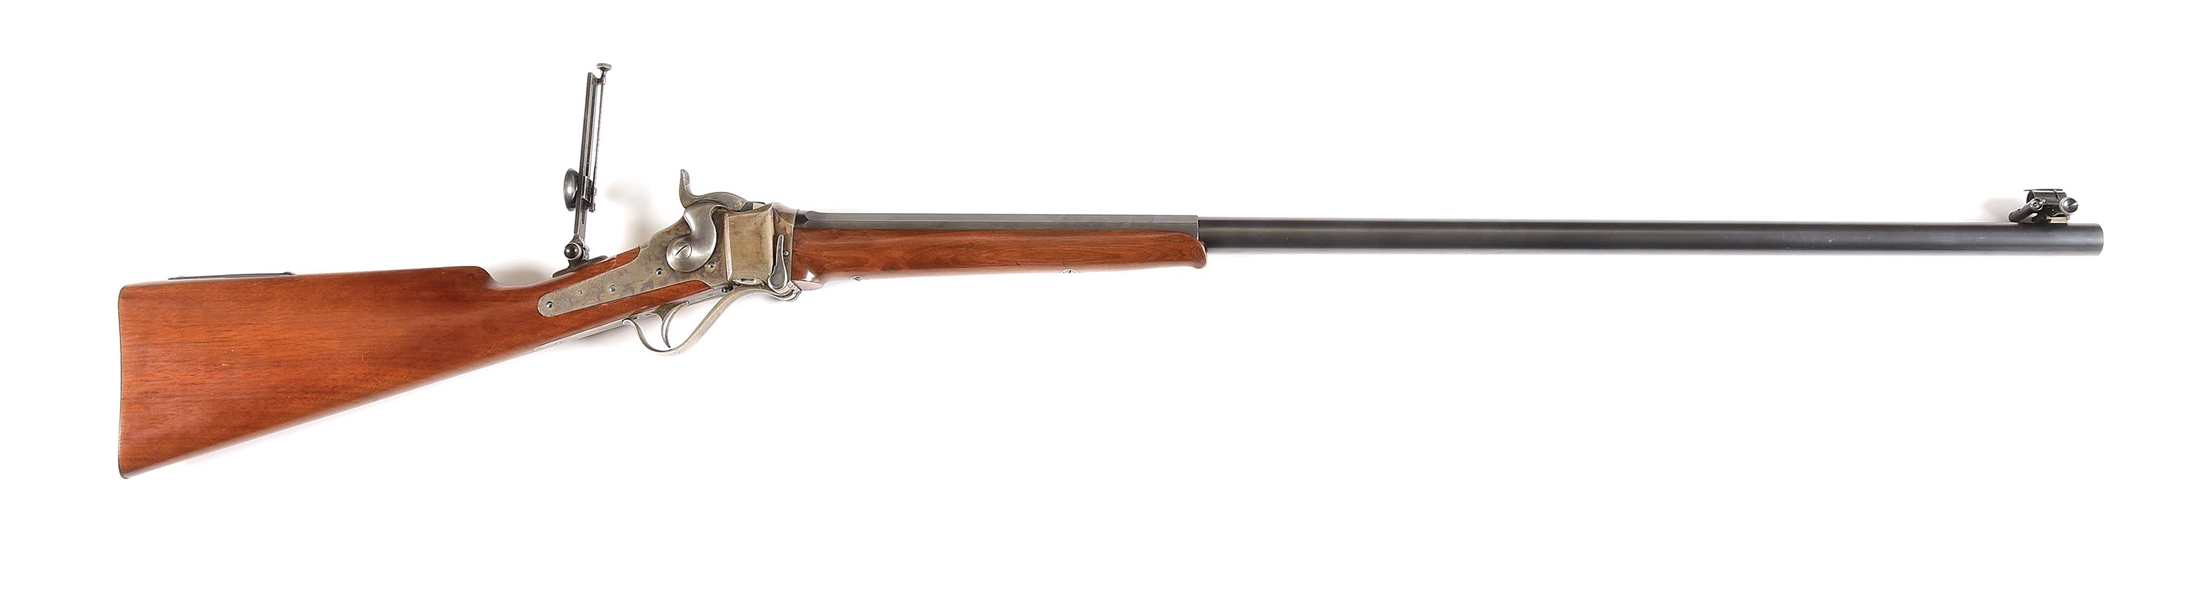 (A) VERY FINE AND HISTORIC SHARPS MODEL 1874 CREEDMOOR RIFLE OWNED BY DEALER BENJAMIN KITTREDGE.